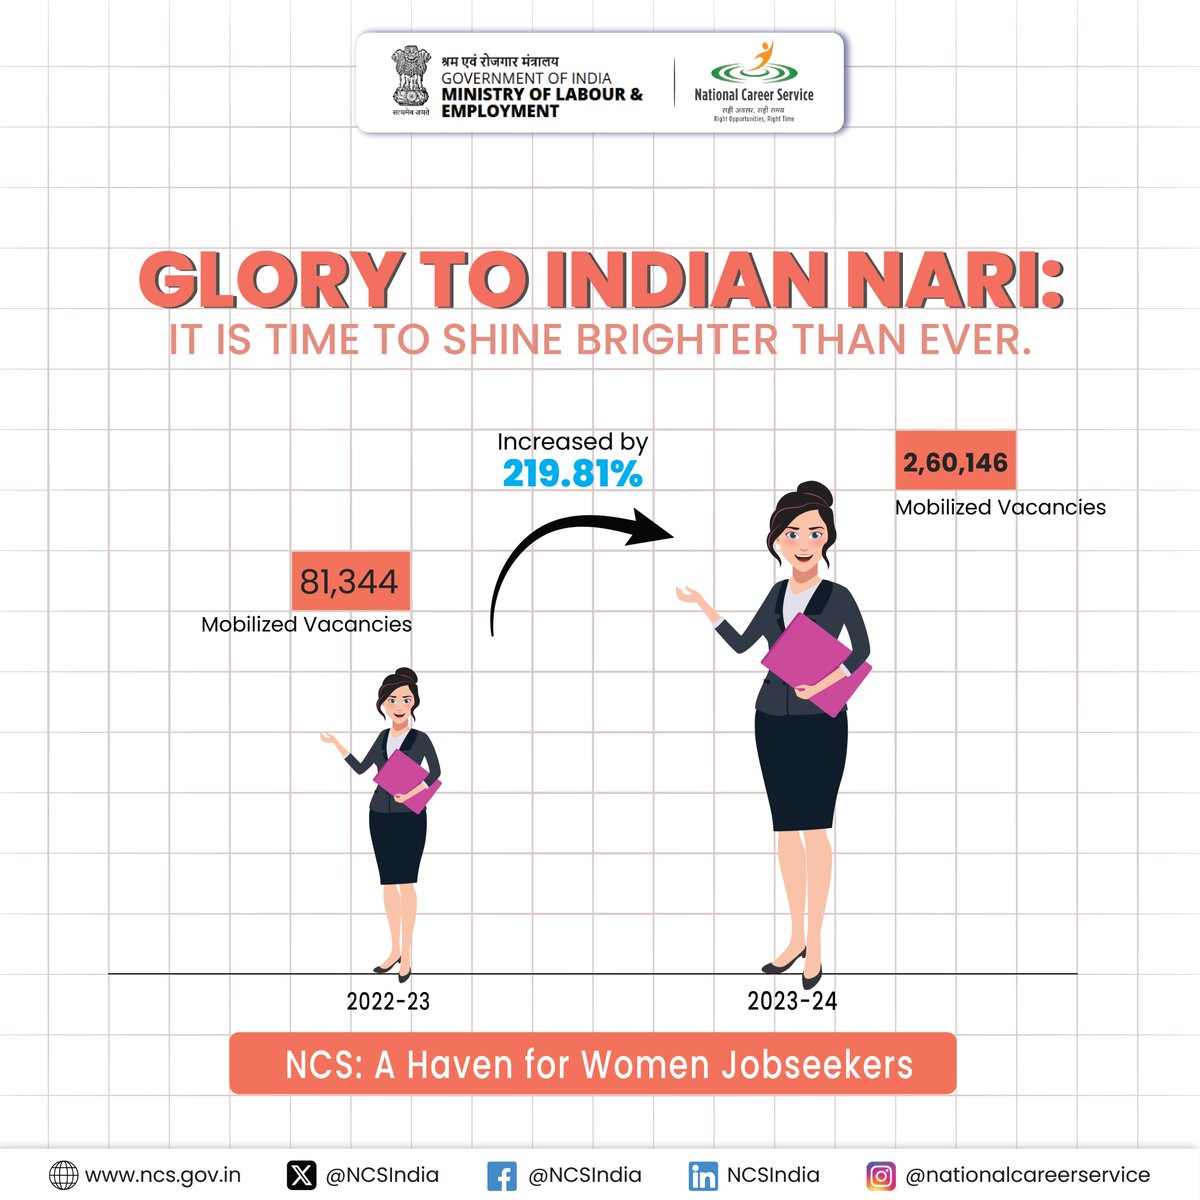 Mobilized vacancies on the NCS Portal reach new heights, especially for women job seekers.

Visit ncs.gov.in today.

@LabourMinistry  @mygovindia

#NCSIndia #career #recruitmentjobs #womenempower #RegisterNow